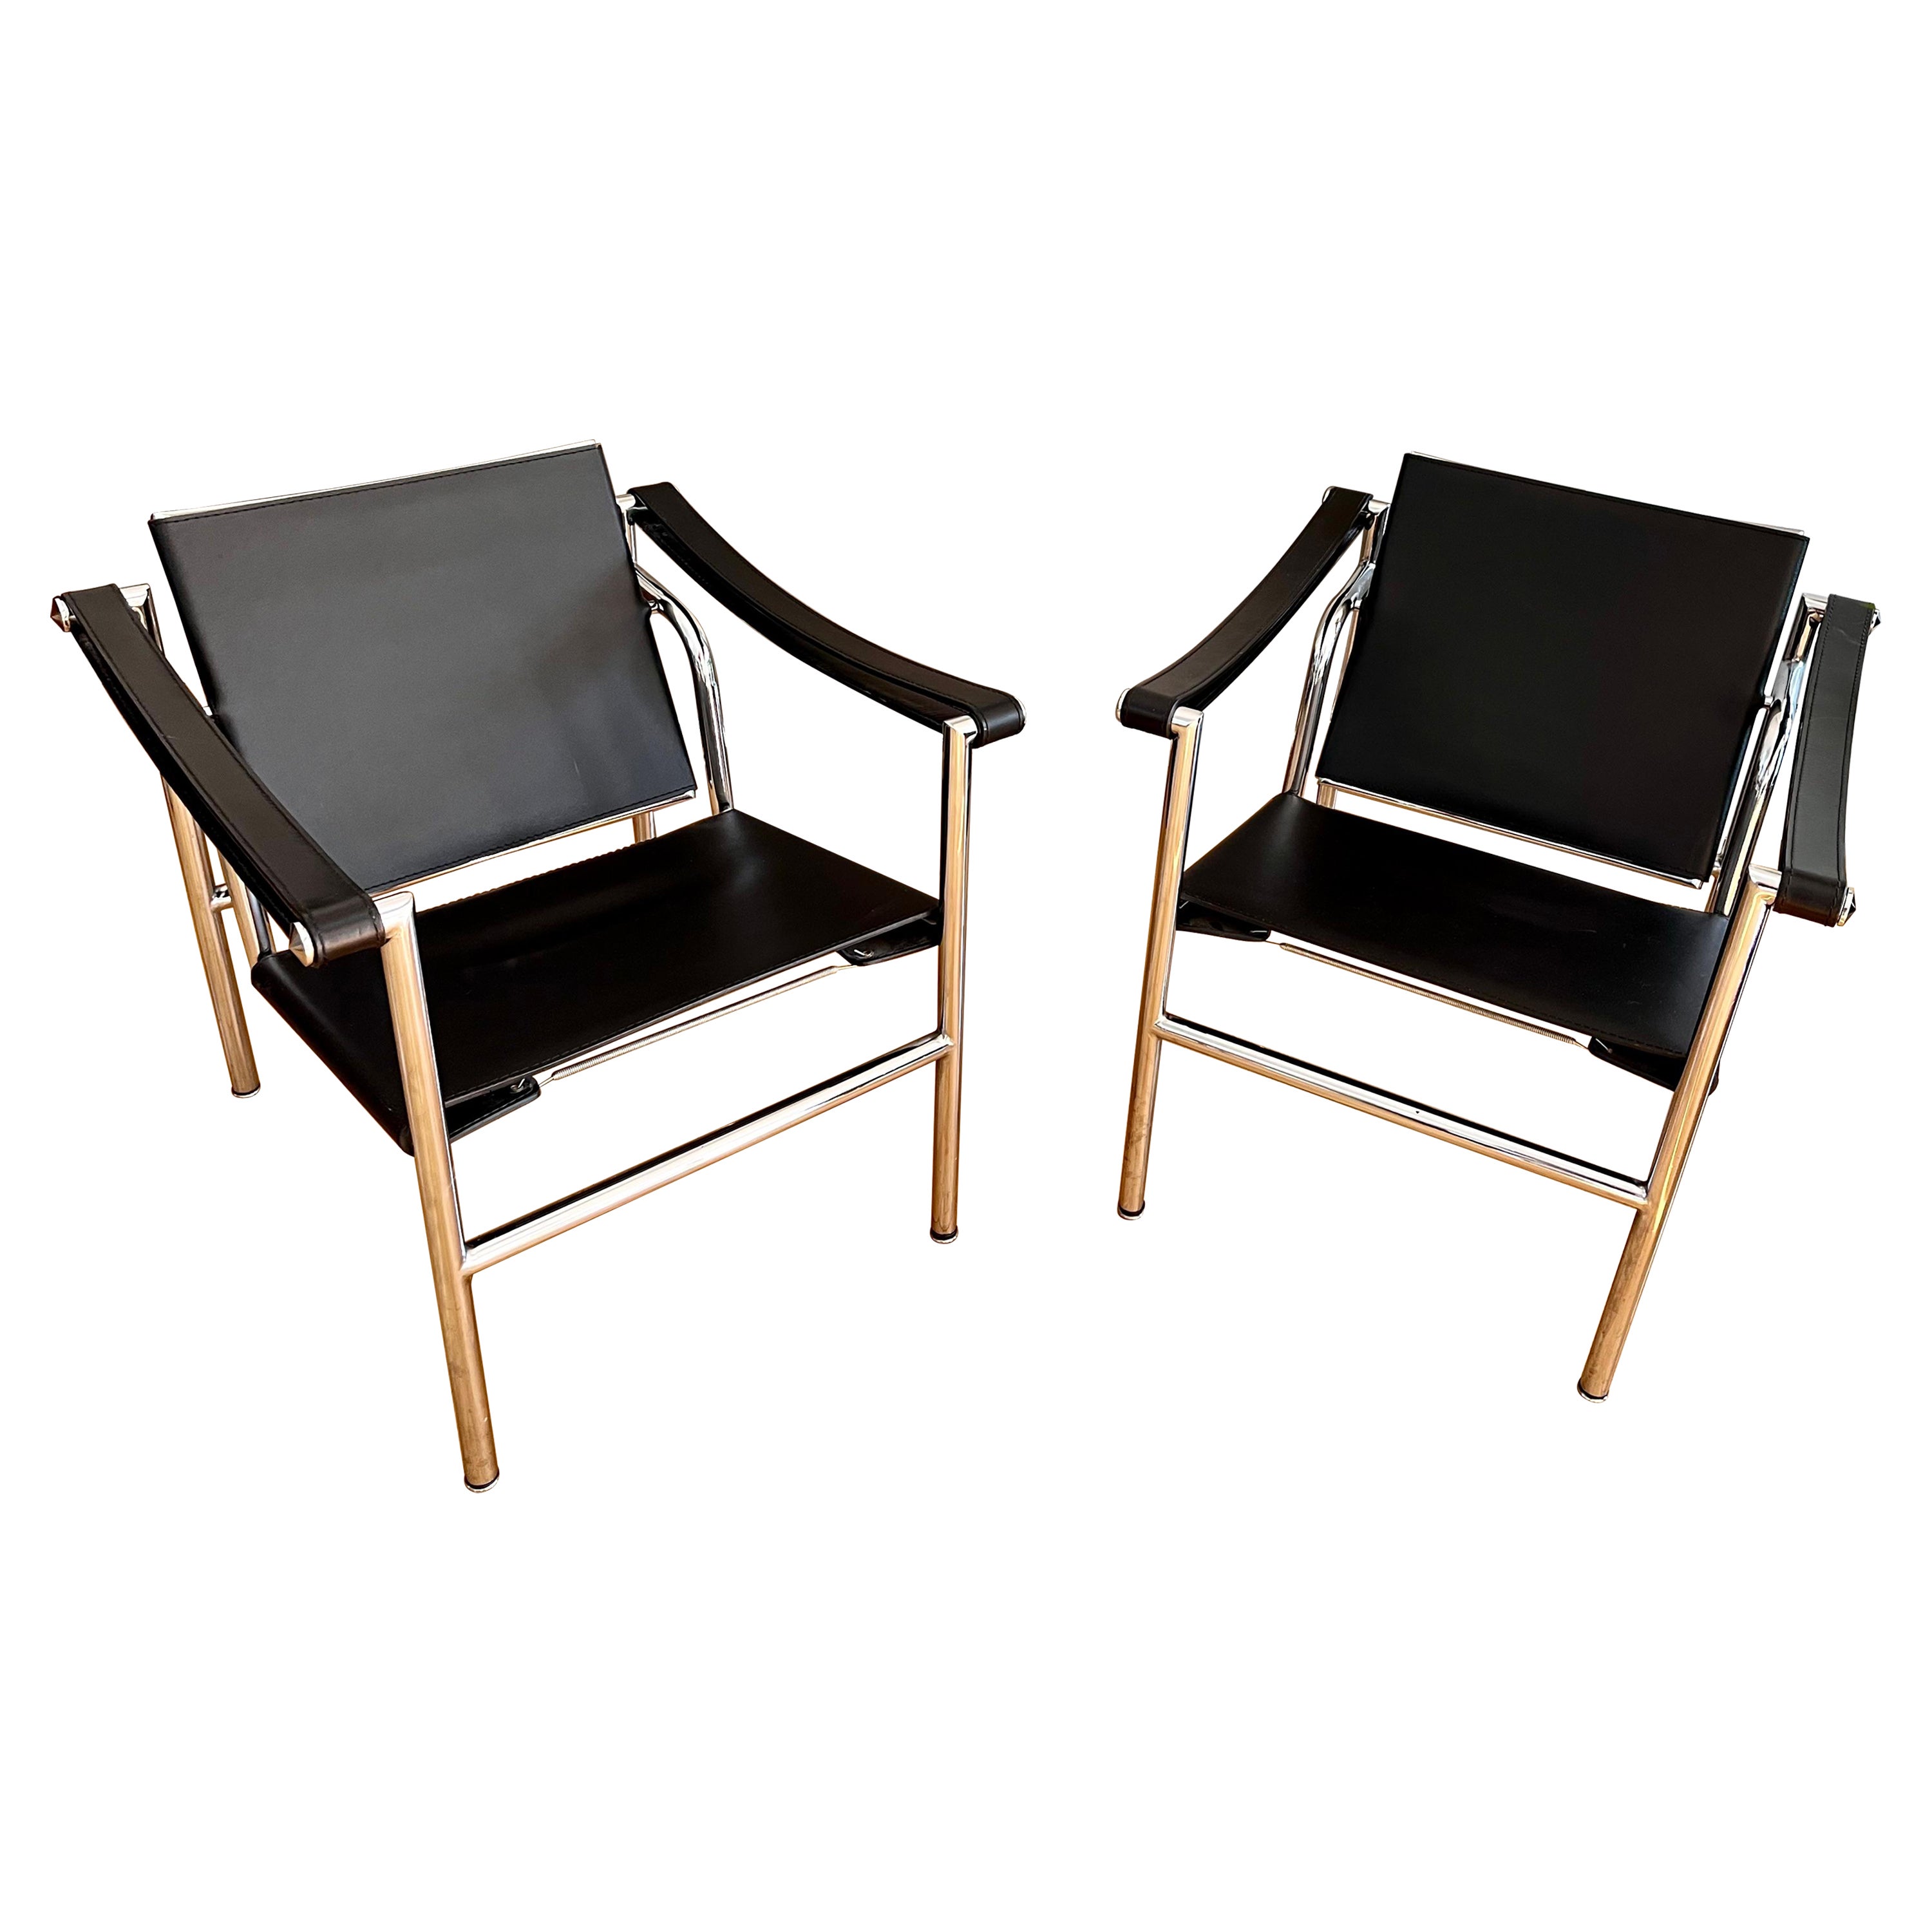 Le Corbusier, P. Jeanneret, C. Perriand Lc1 Chairs by Cassina